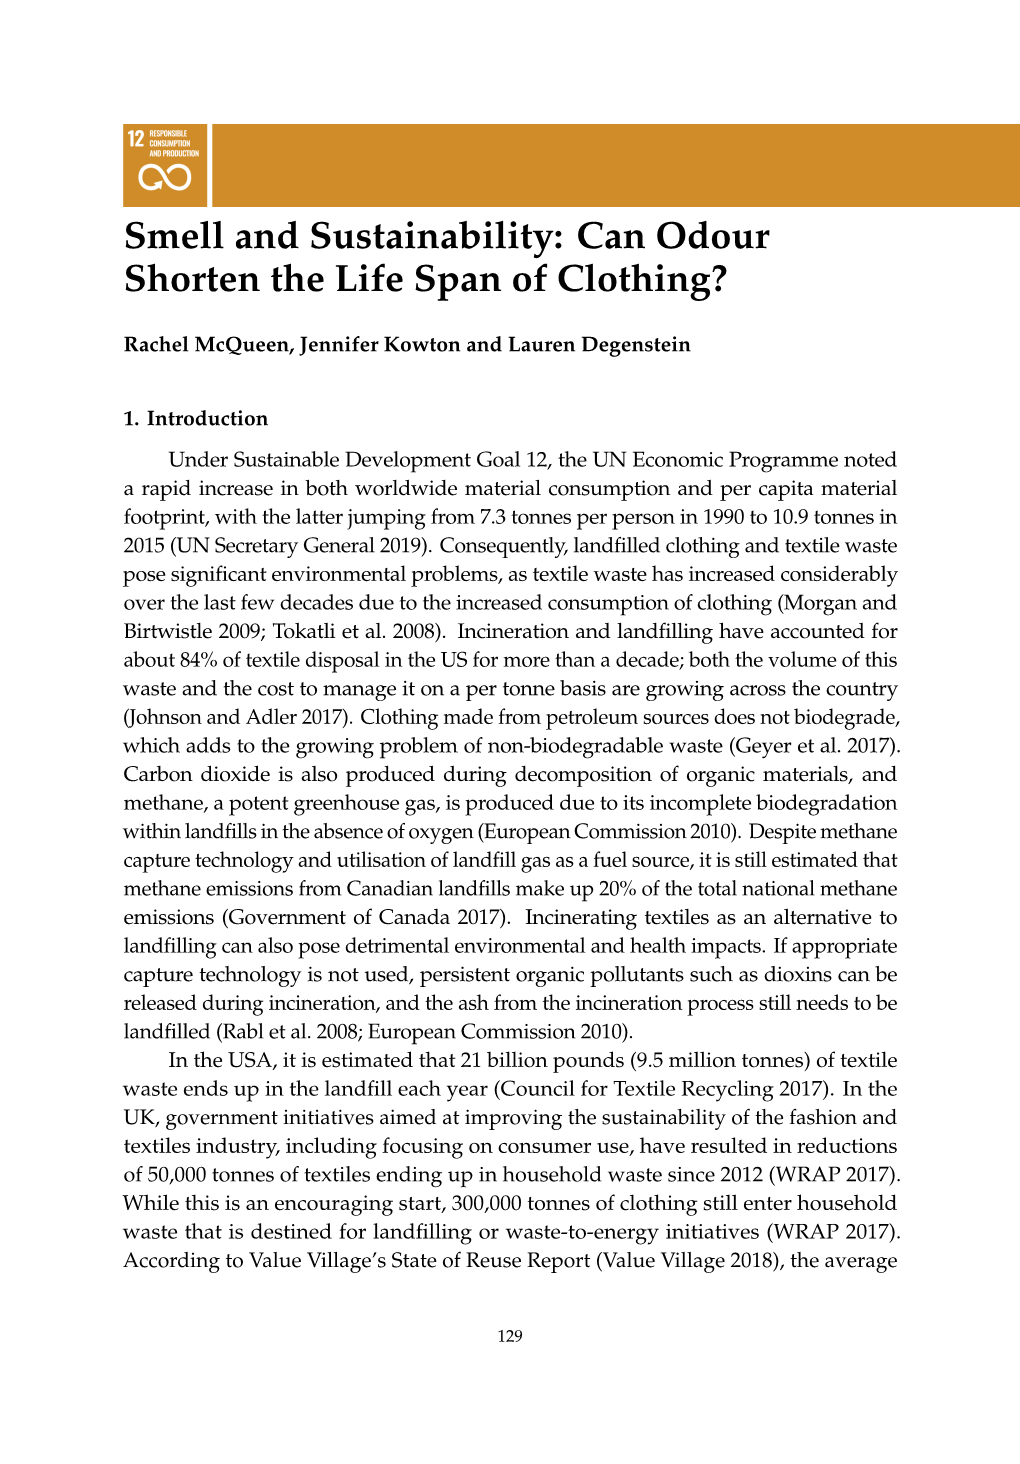 Smell and Sustainability: Can Odour Shorten the Life Span of Clothing?